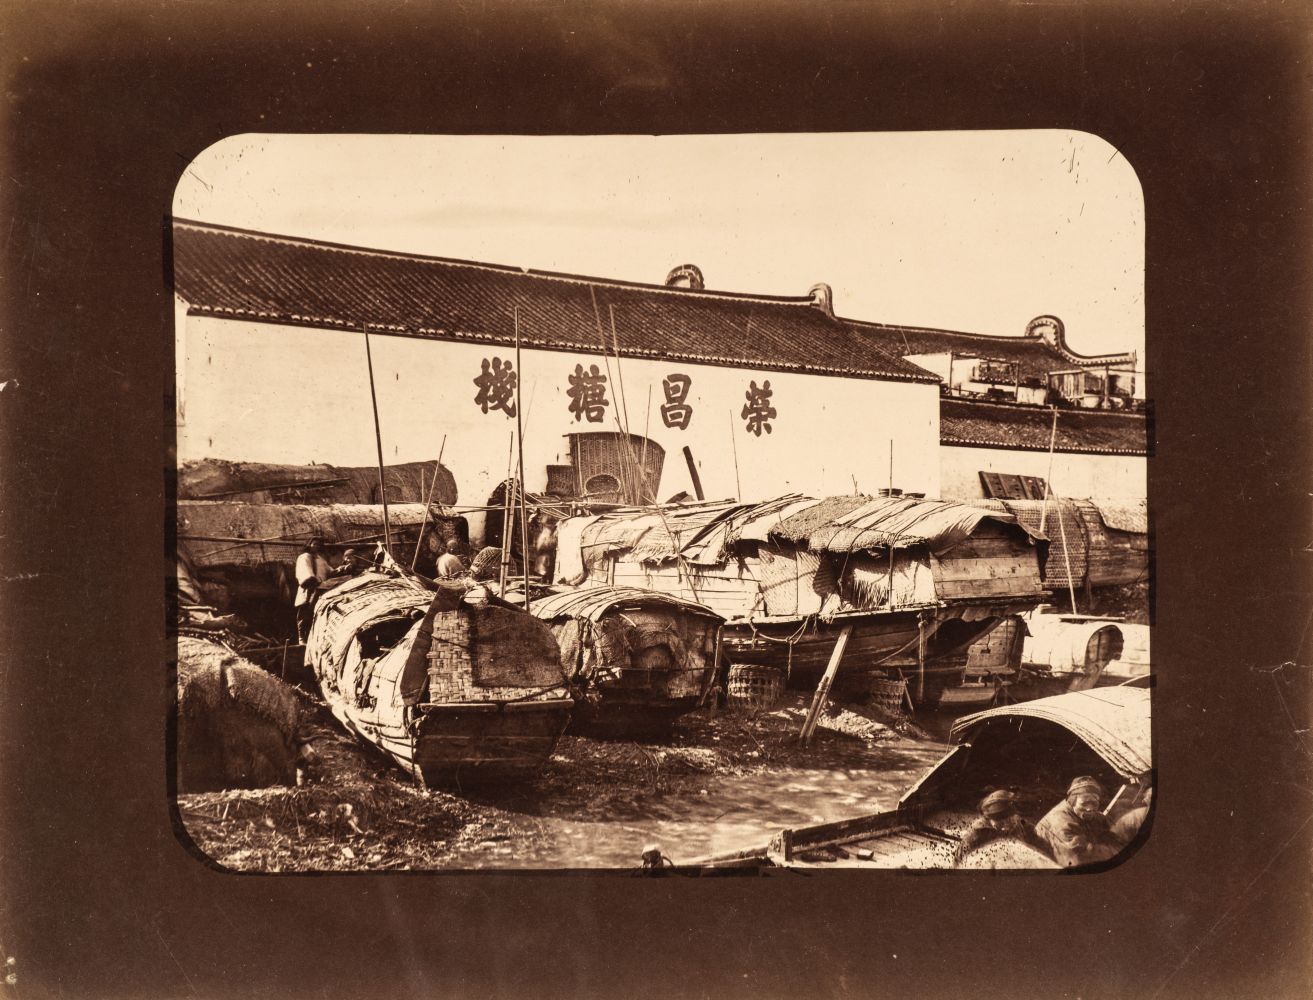 China. Dwellings of the Poor on the Riverbank, Shanghai, by William Saunders, c. 1870